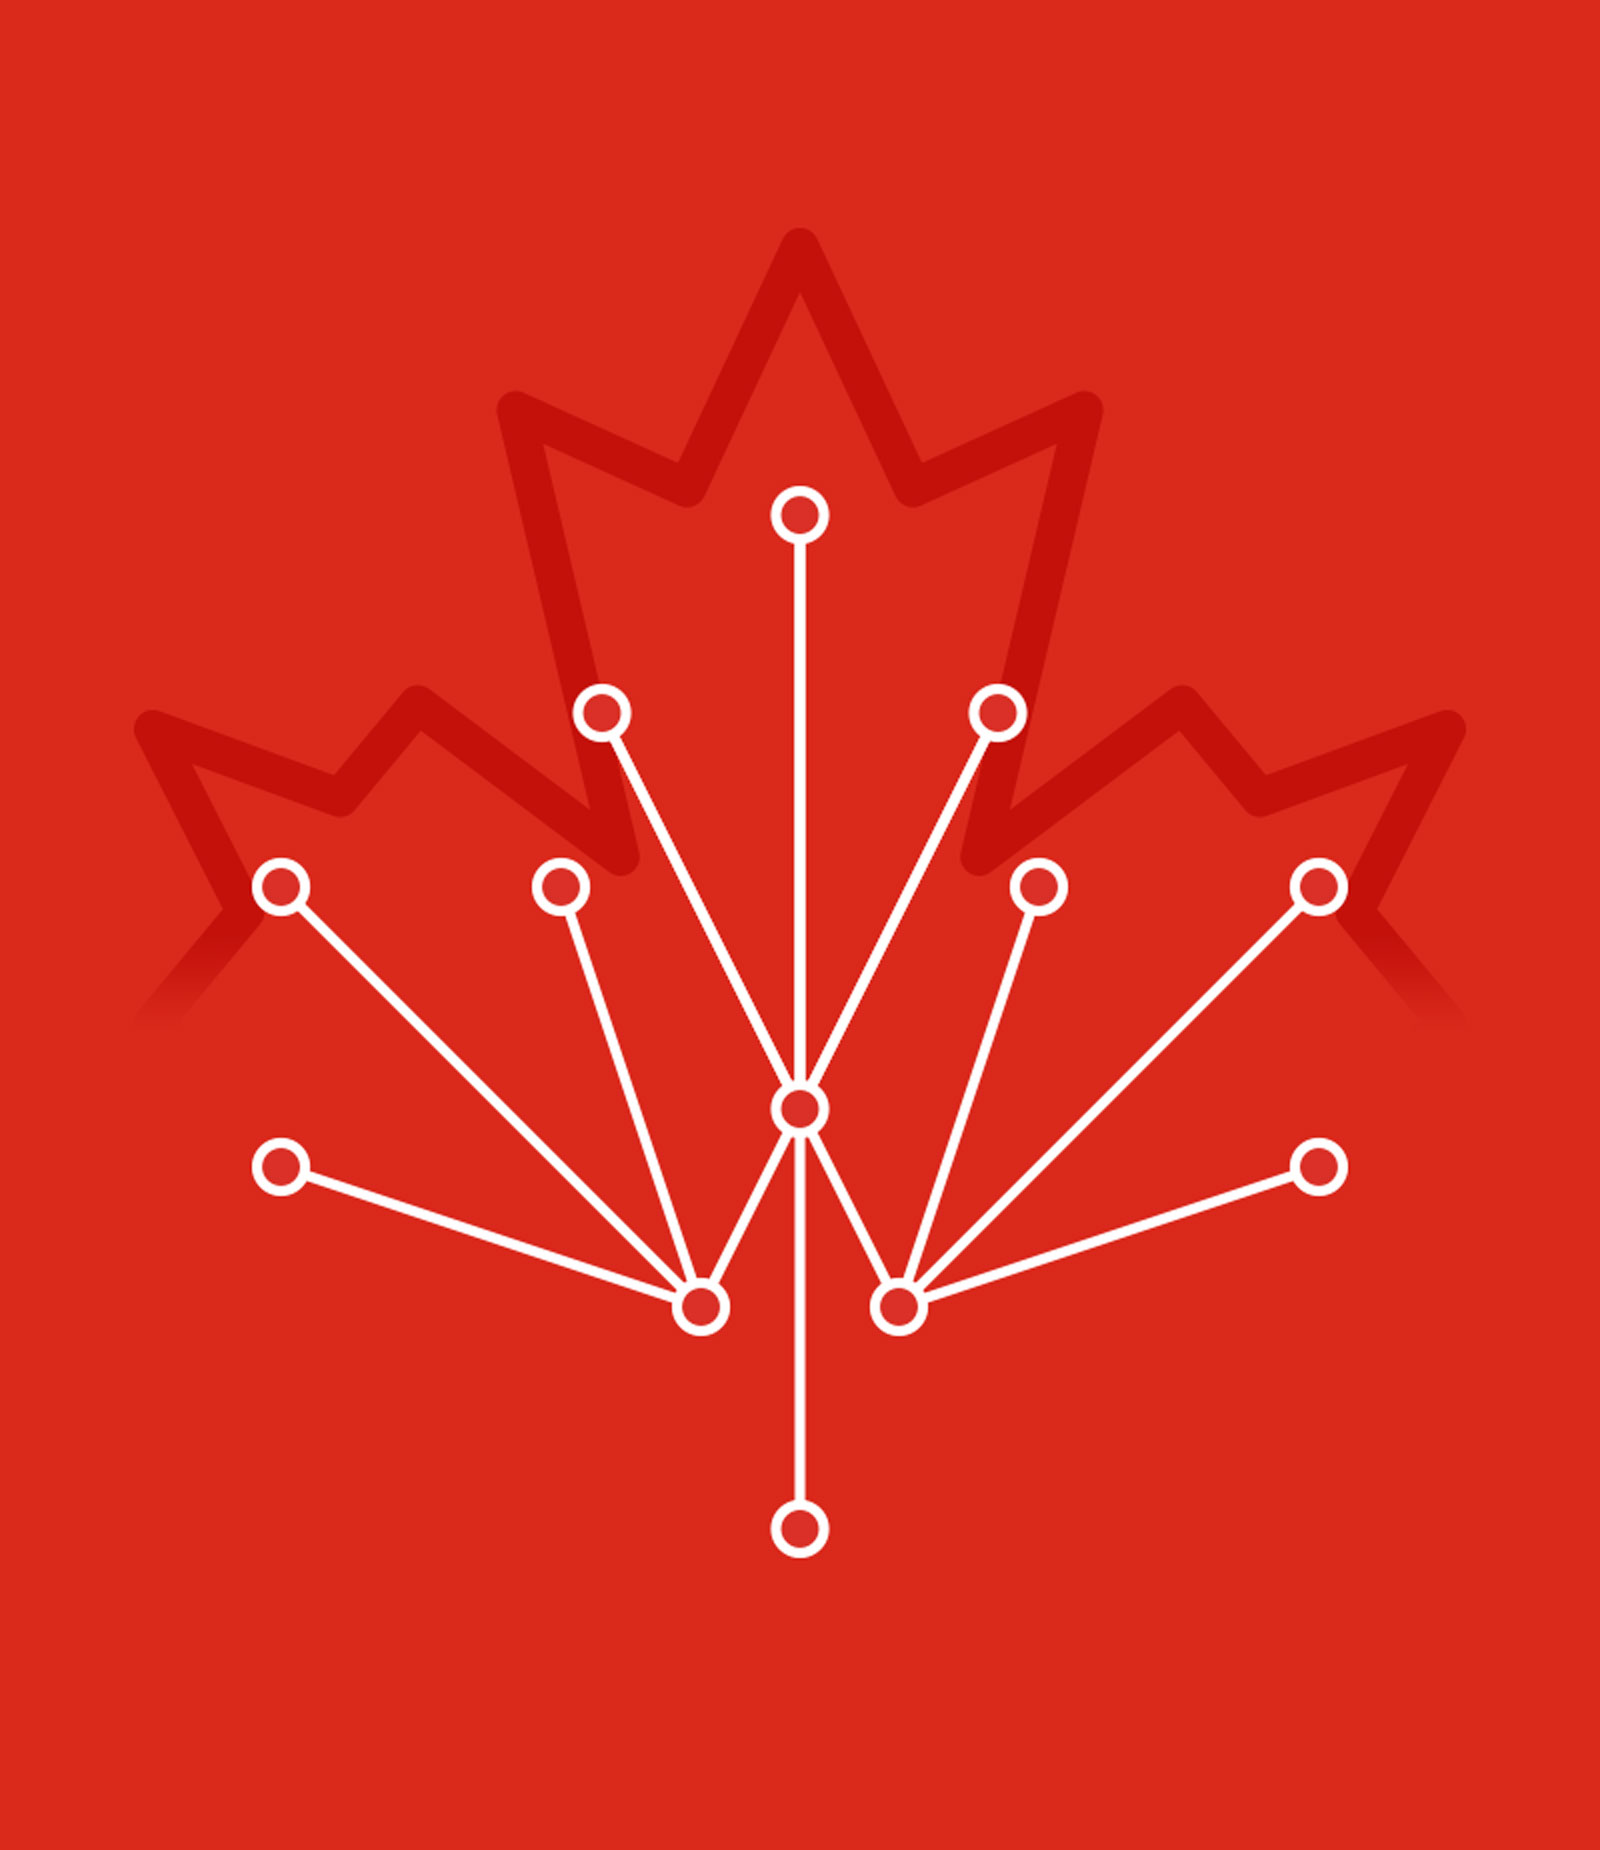 Illustration of circuits overlapping a maple leaf